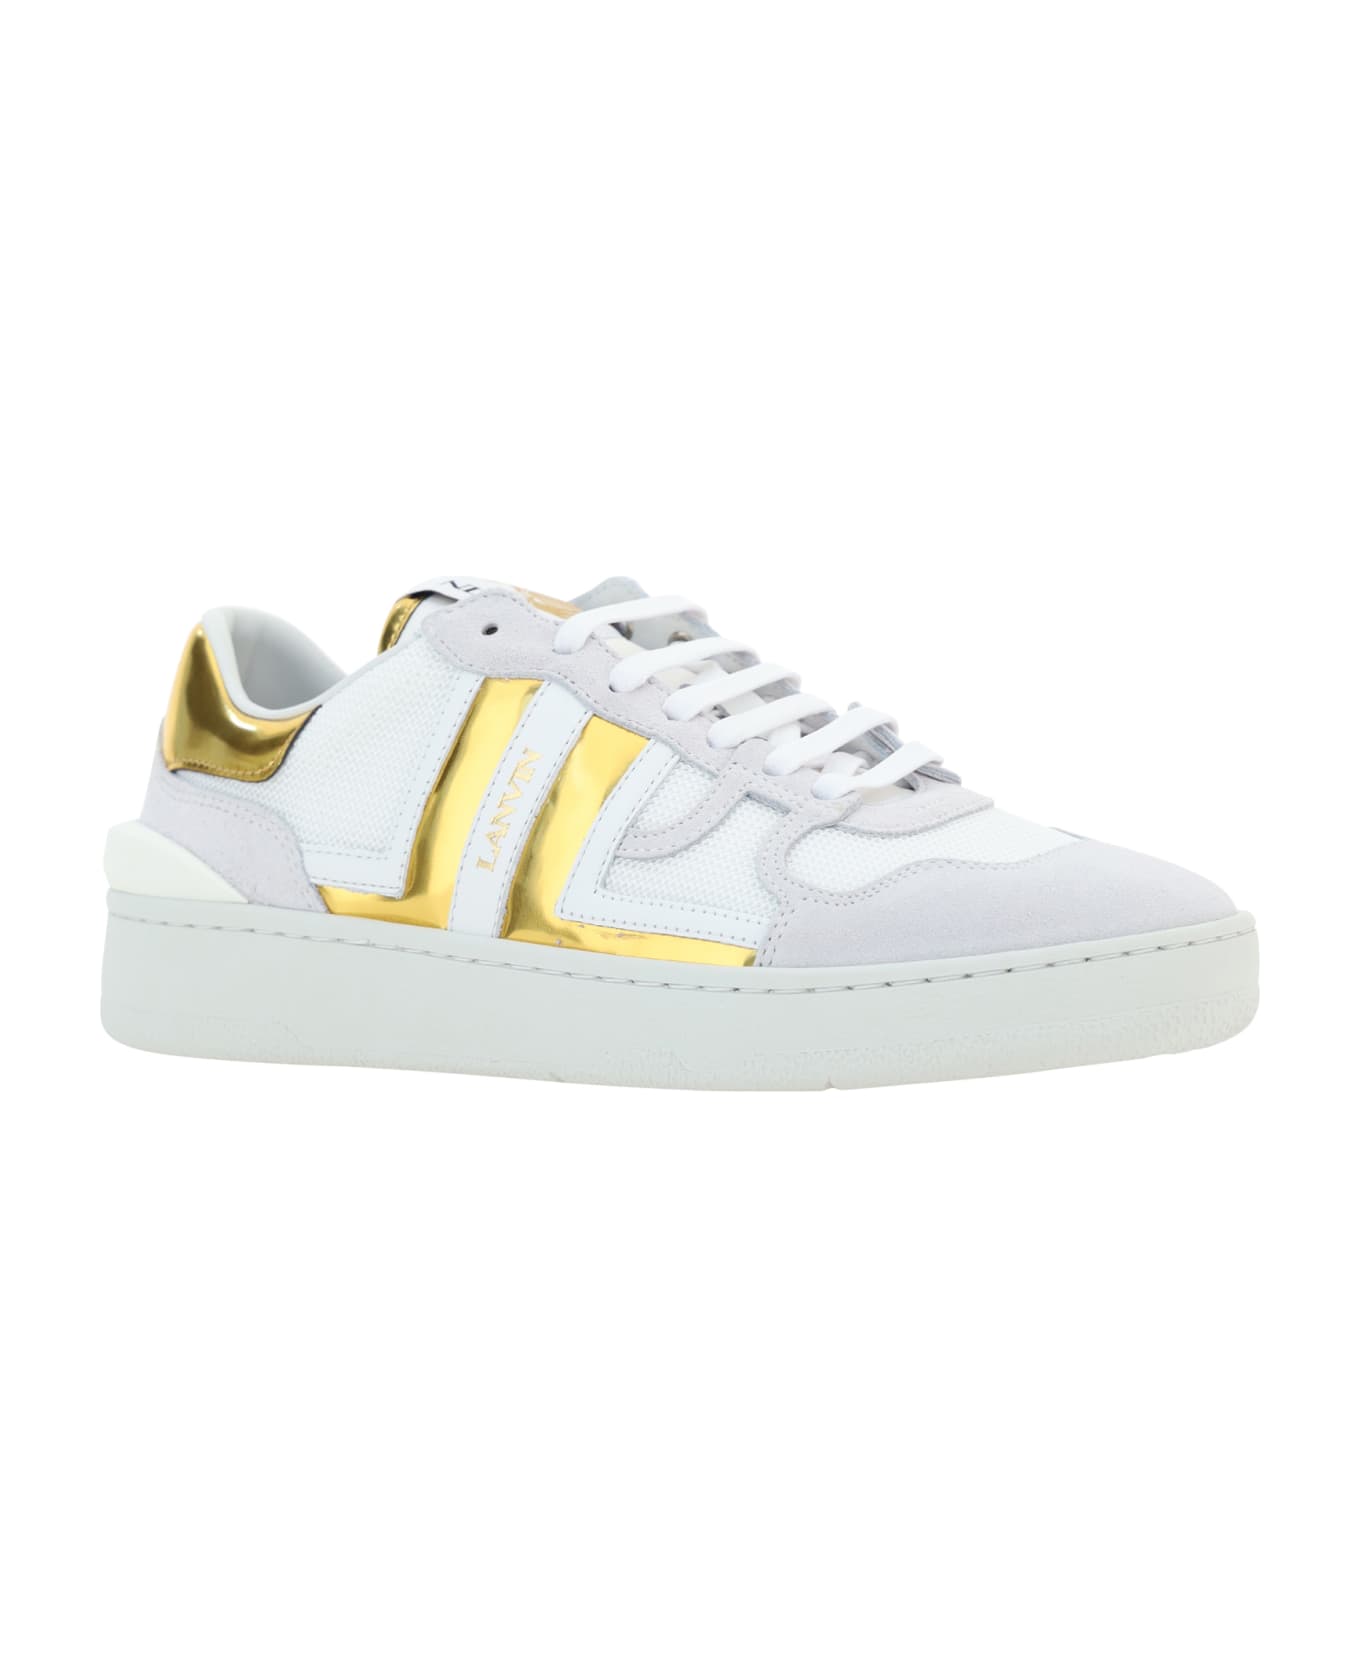 Lanvin Top Sneakers - White/gold スニーカー